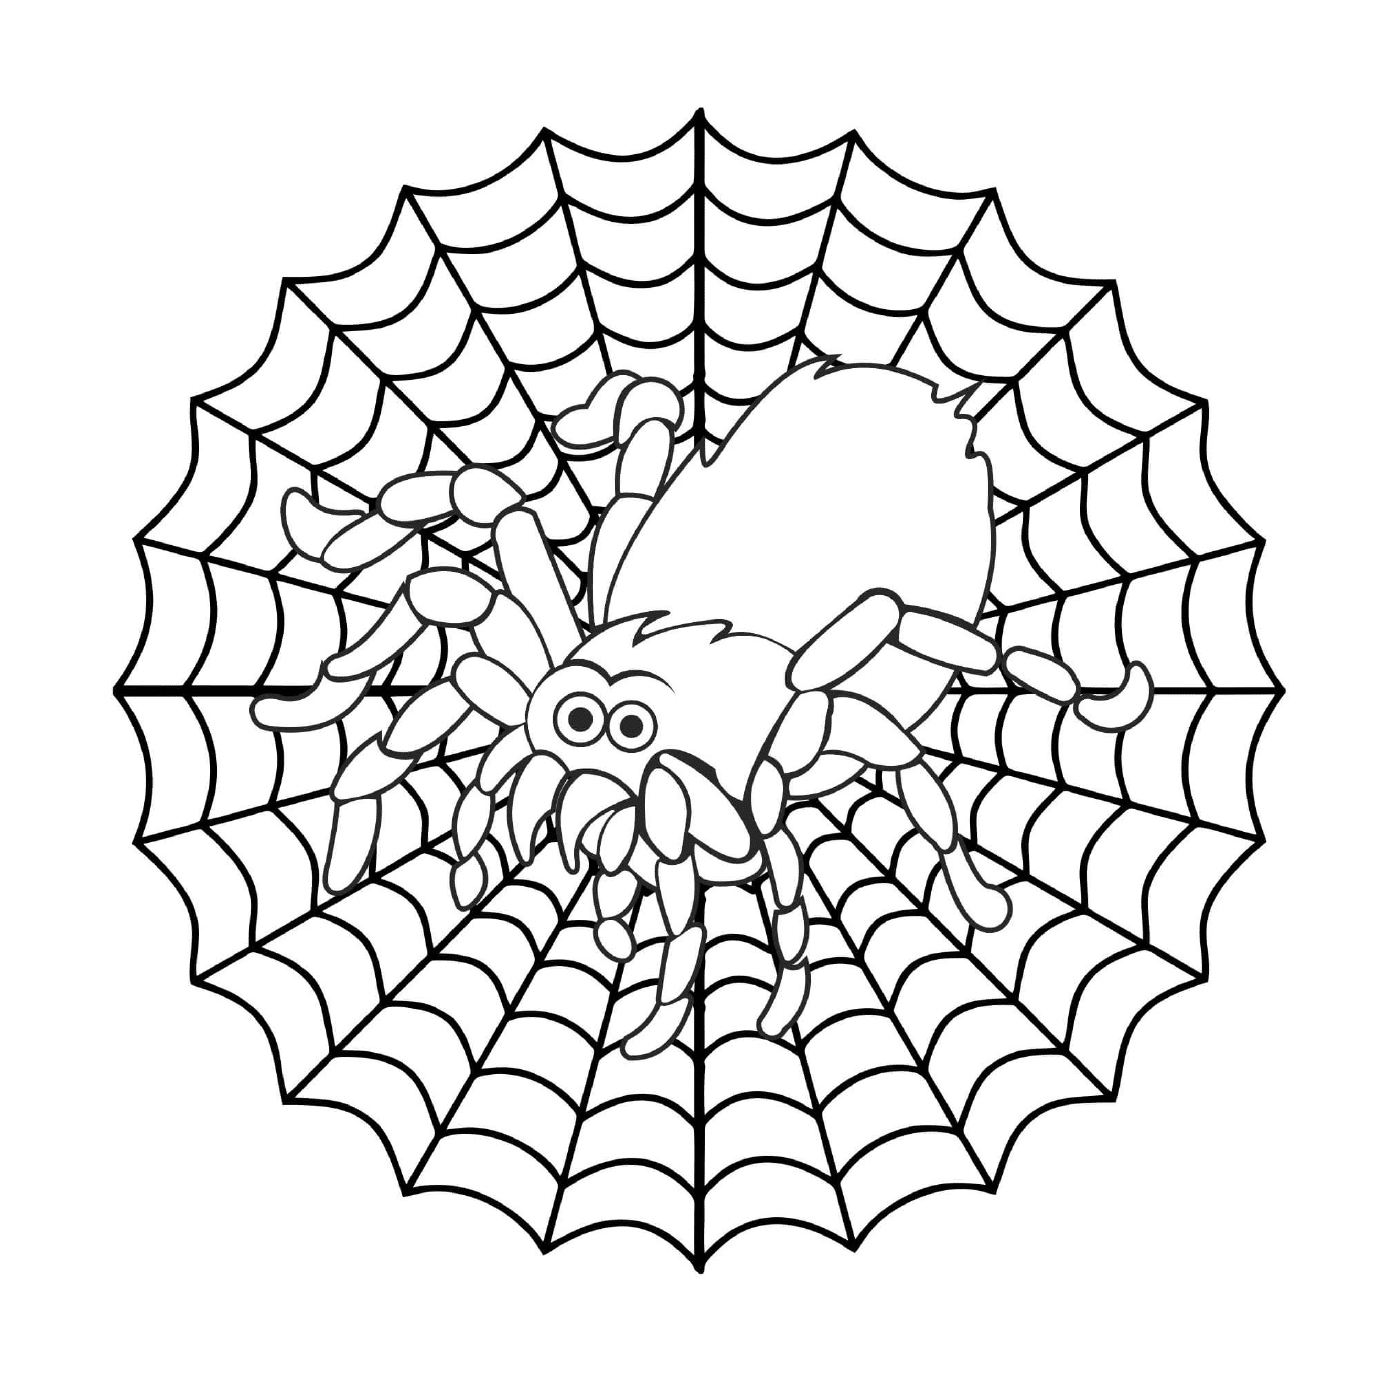  A spider on a web 